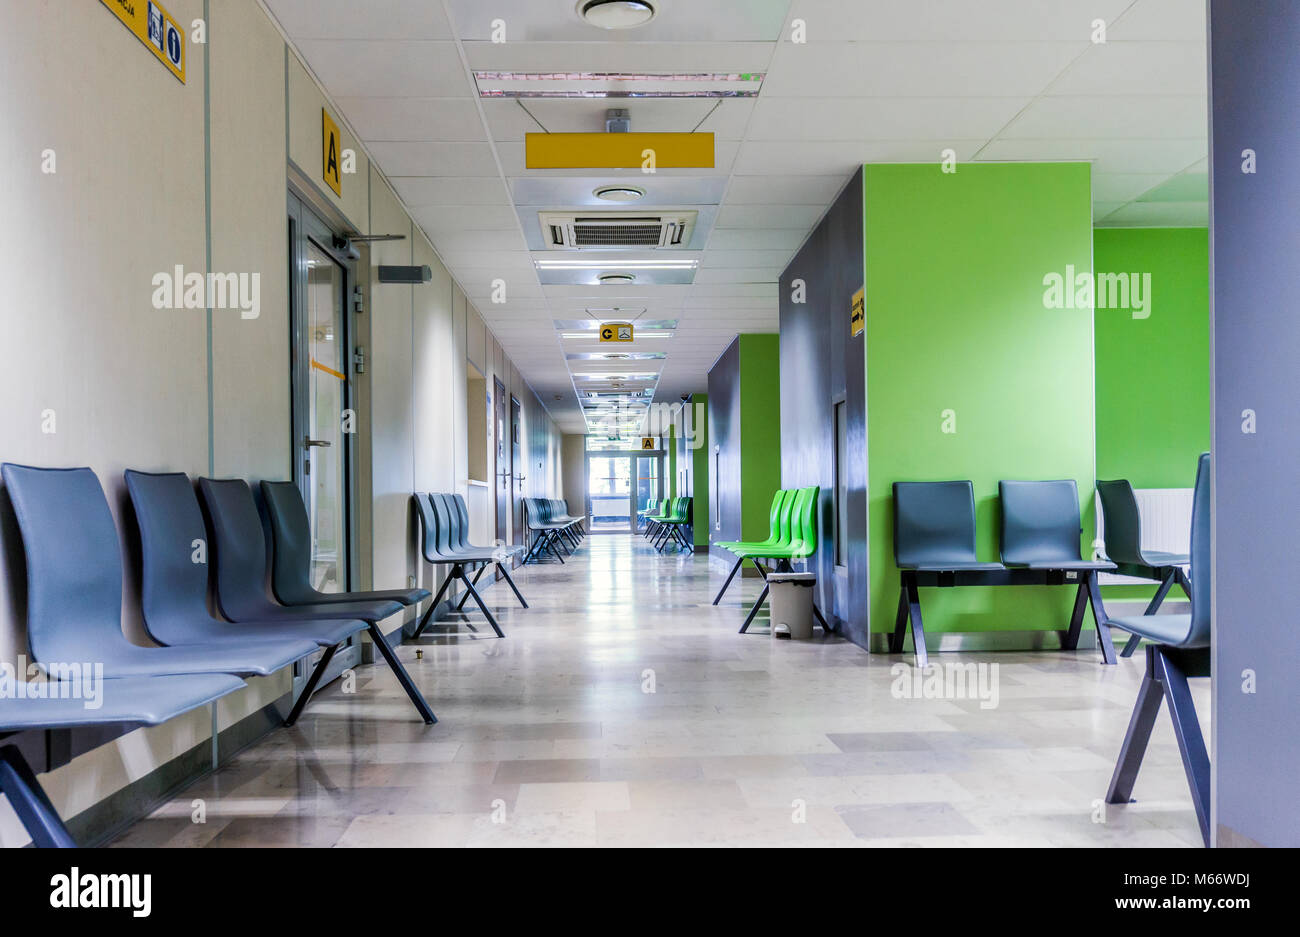 Corridor With Chairs For Patients In A Modern Hospital Stock